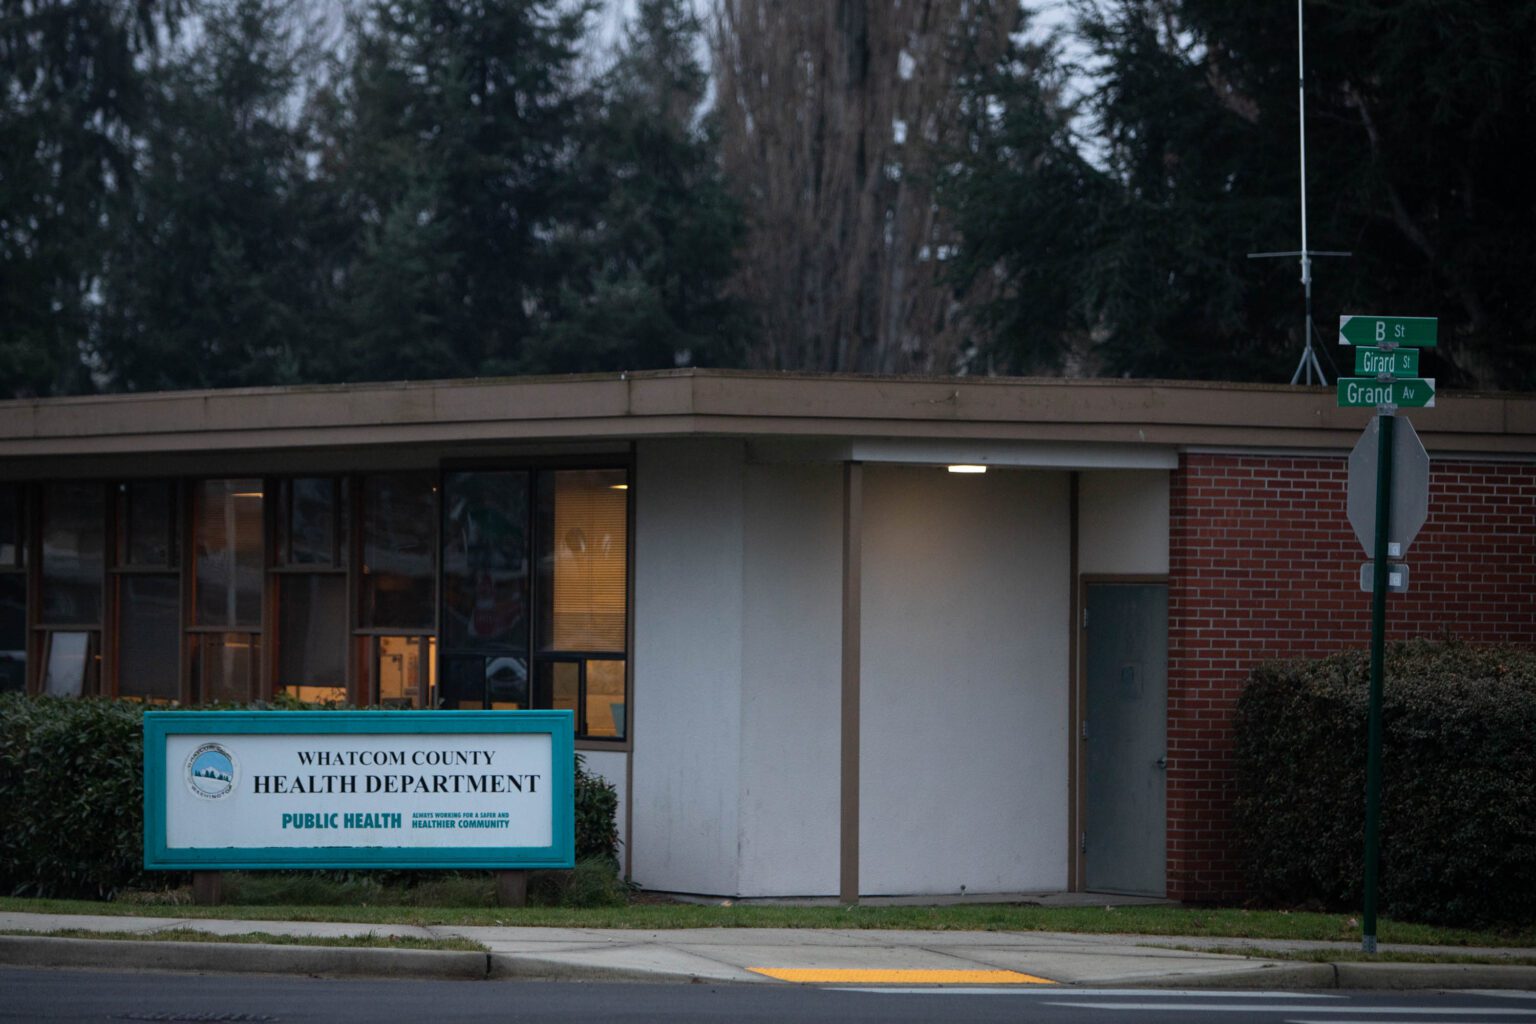 The front of Whatcom County Health Department where a sign is displayed next to the door.